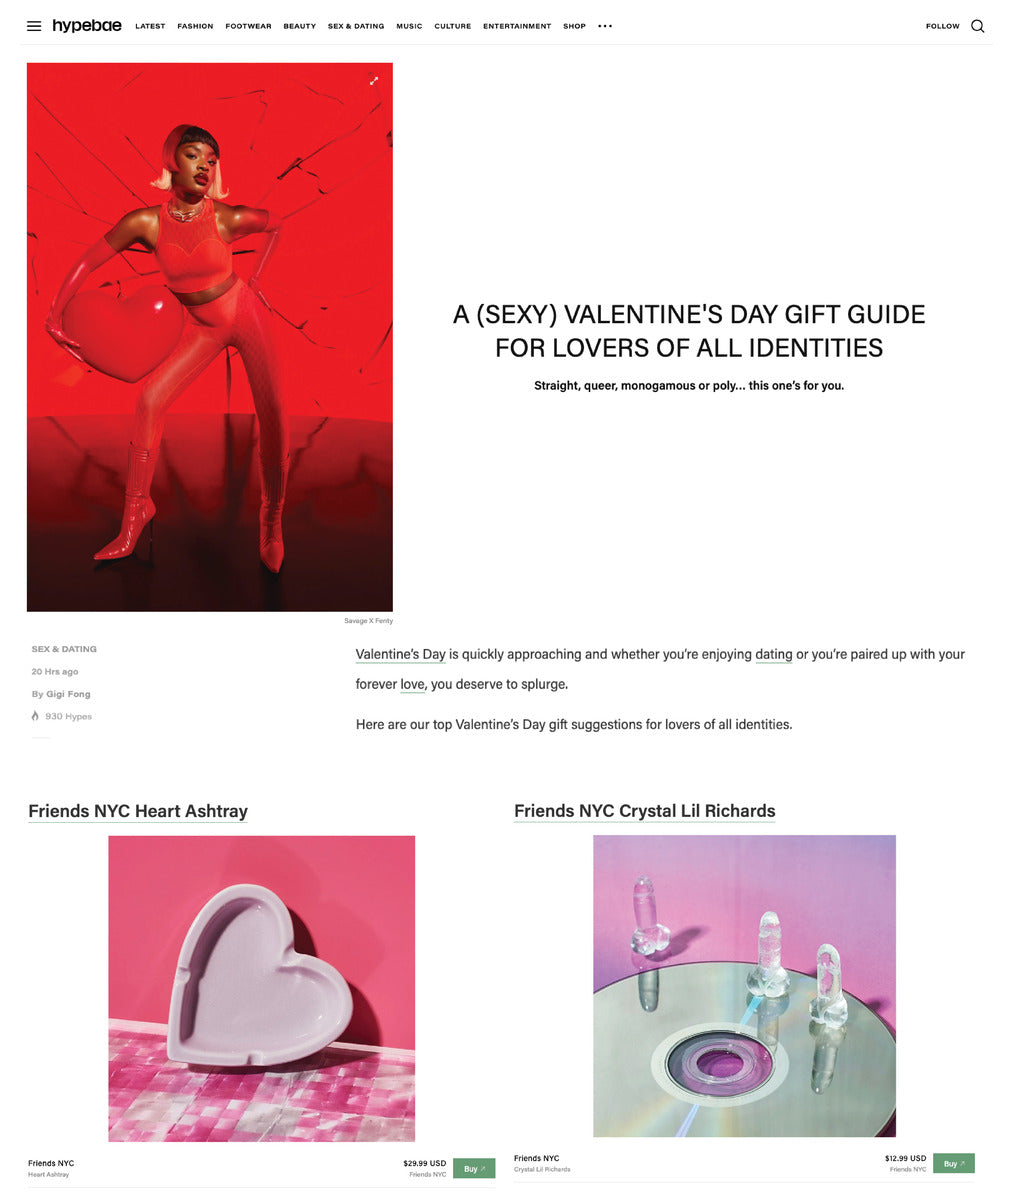 Friends nyc in hypebae valentines gift guide for all gender identities